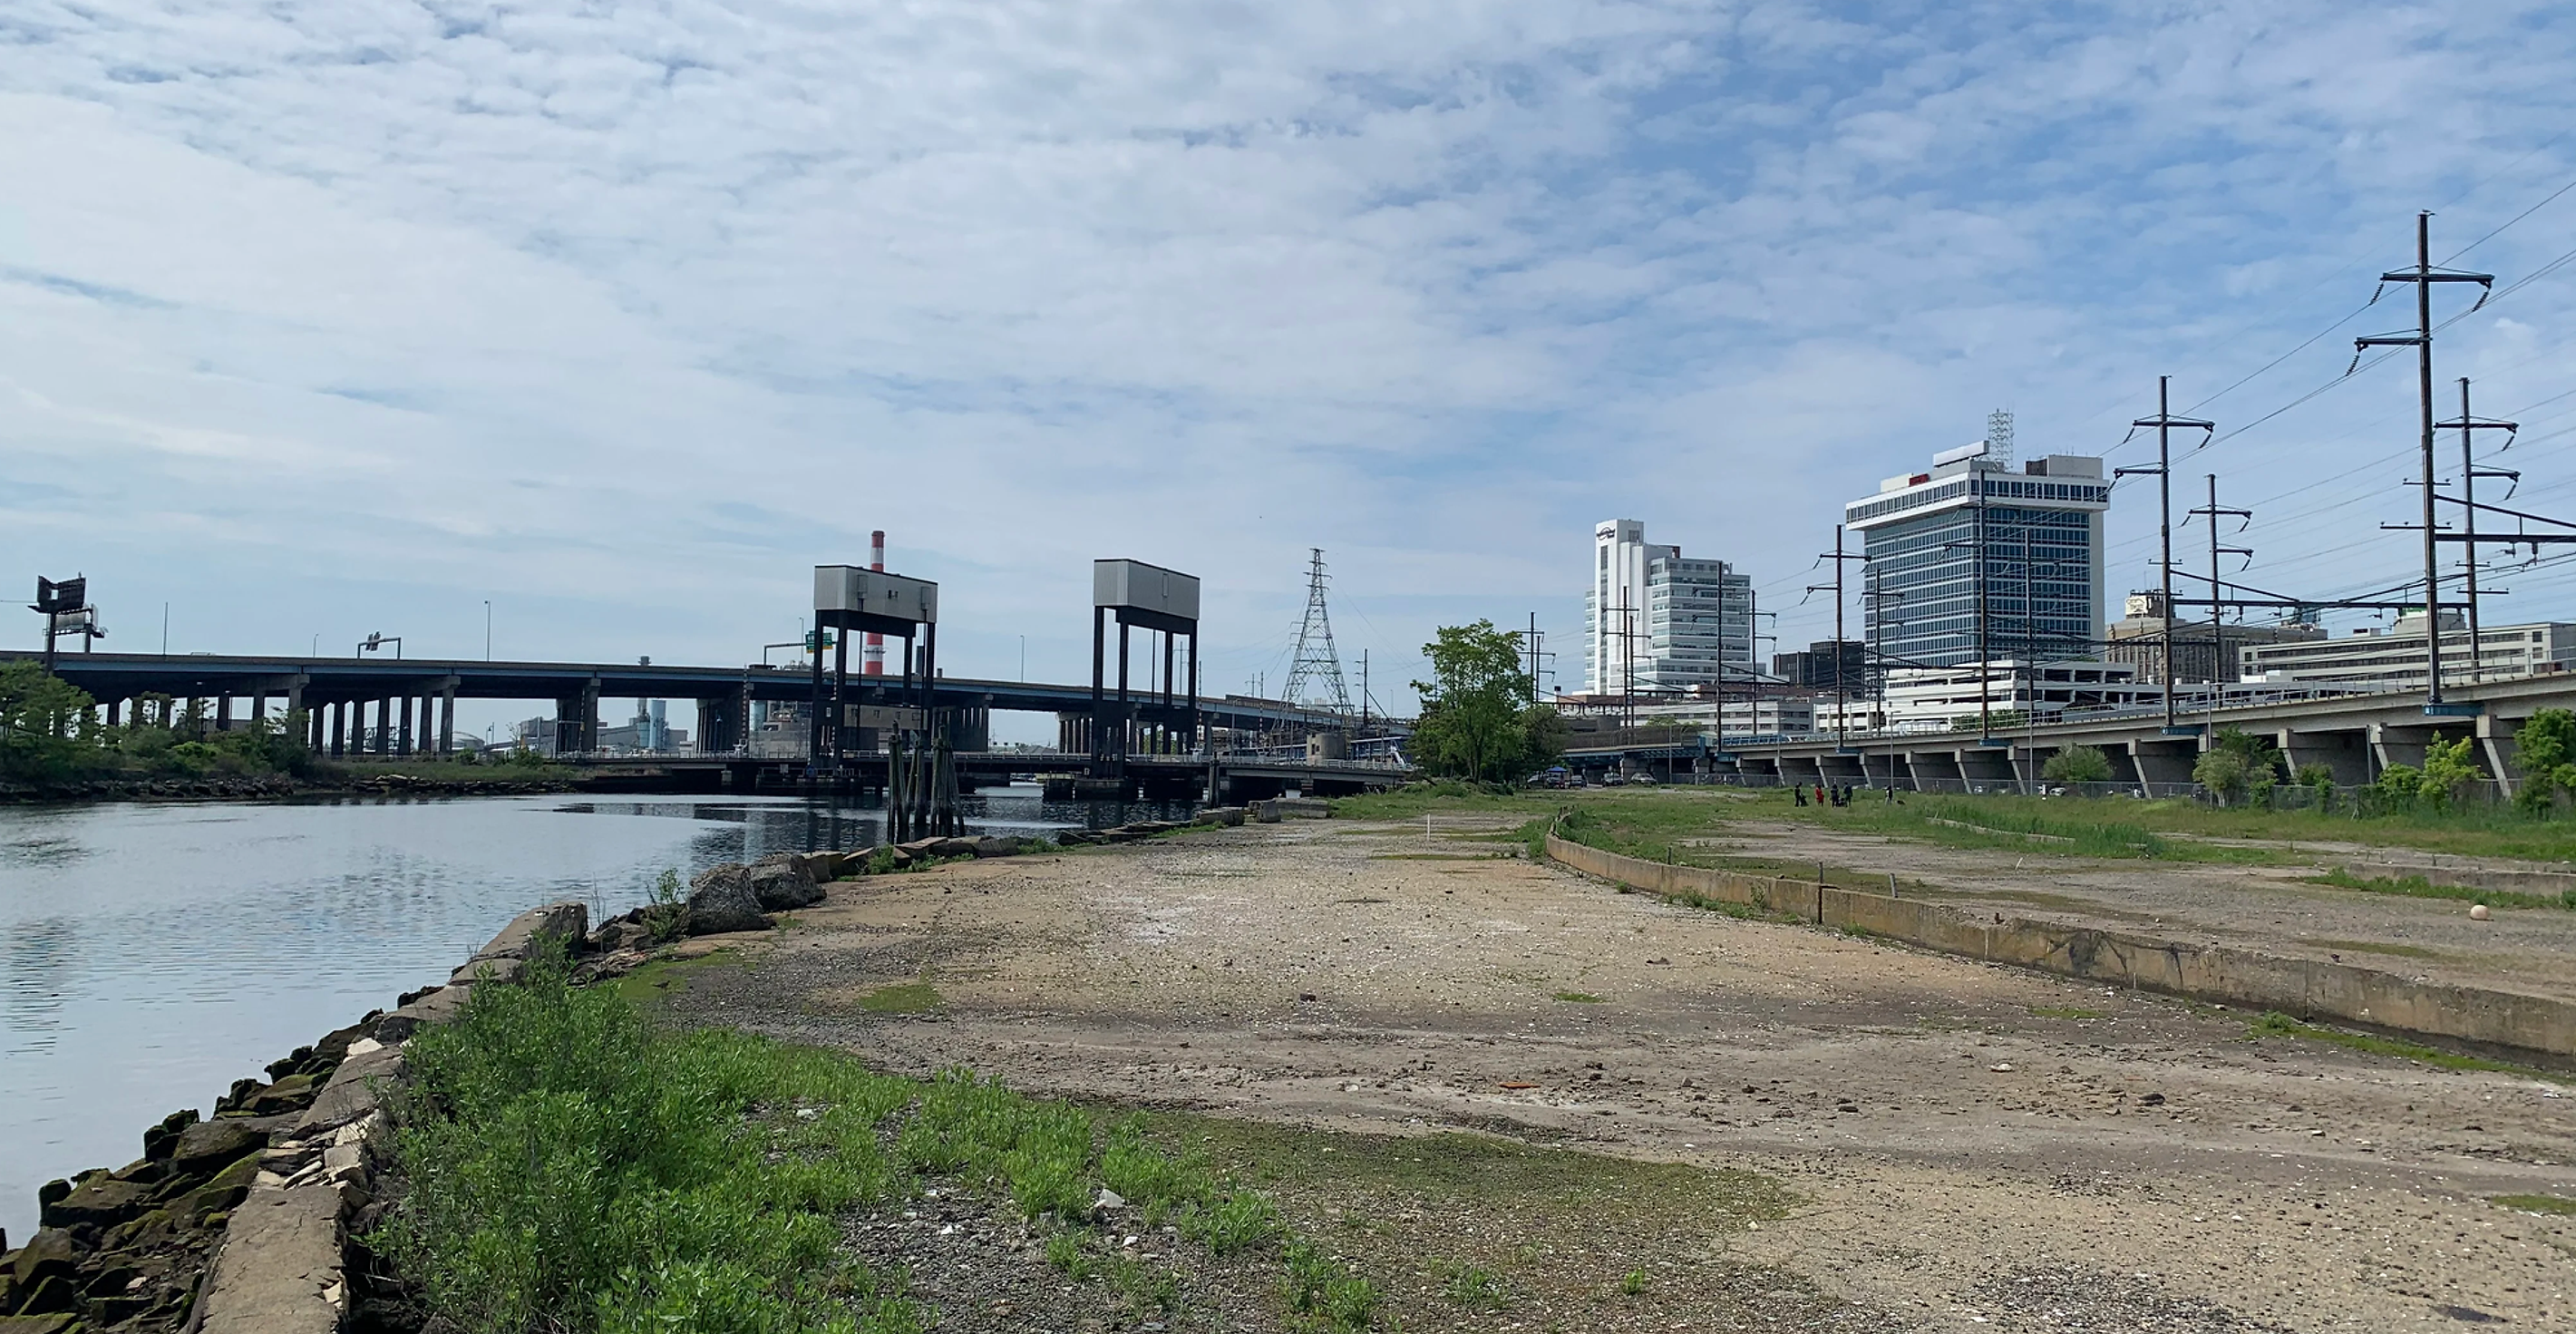 view of empty lot with bridge and buildings in the background